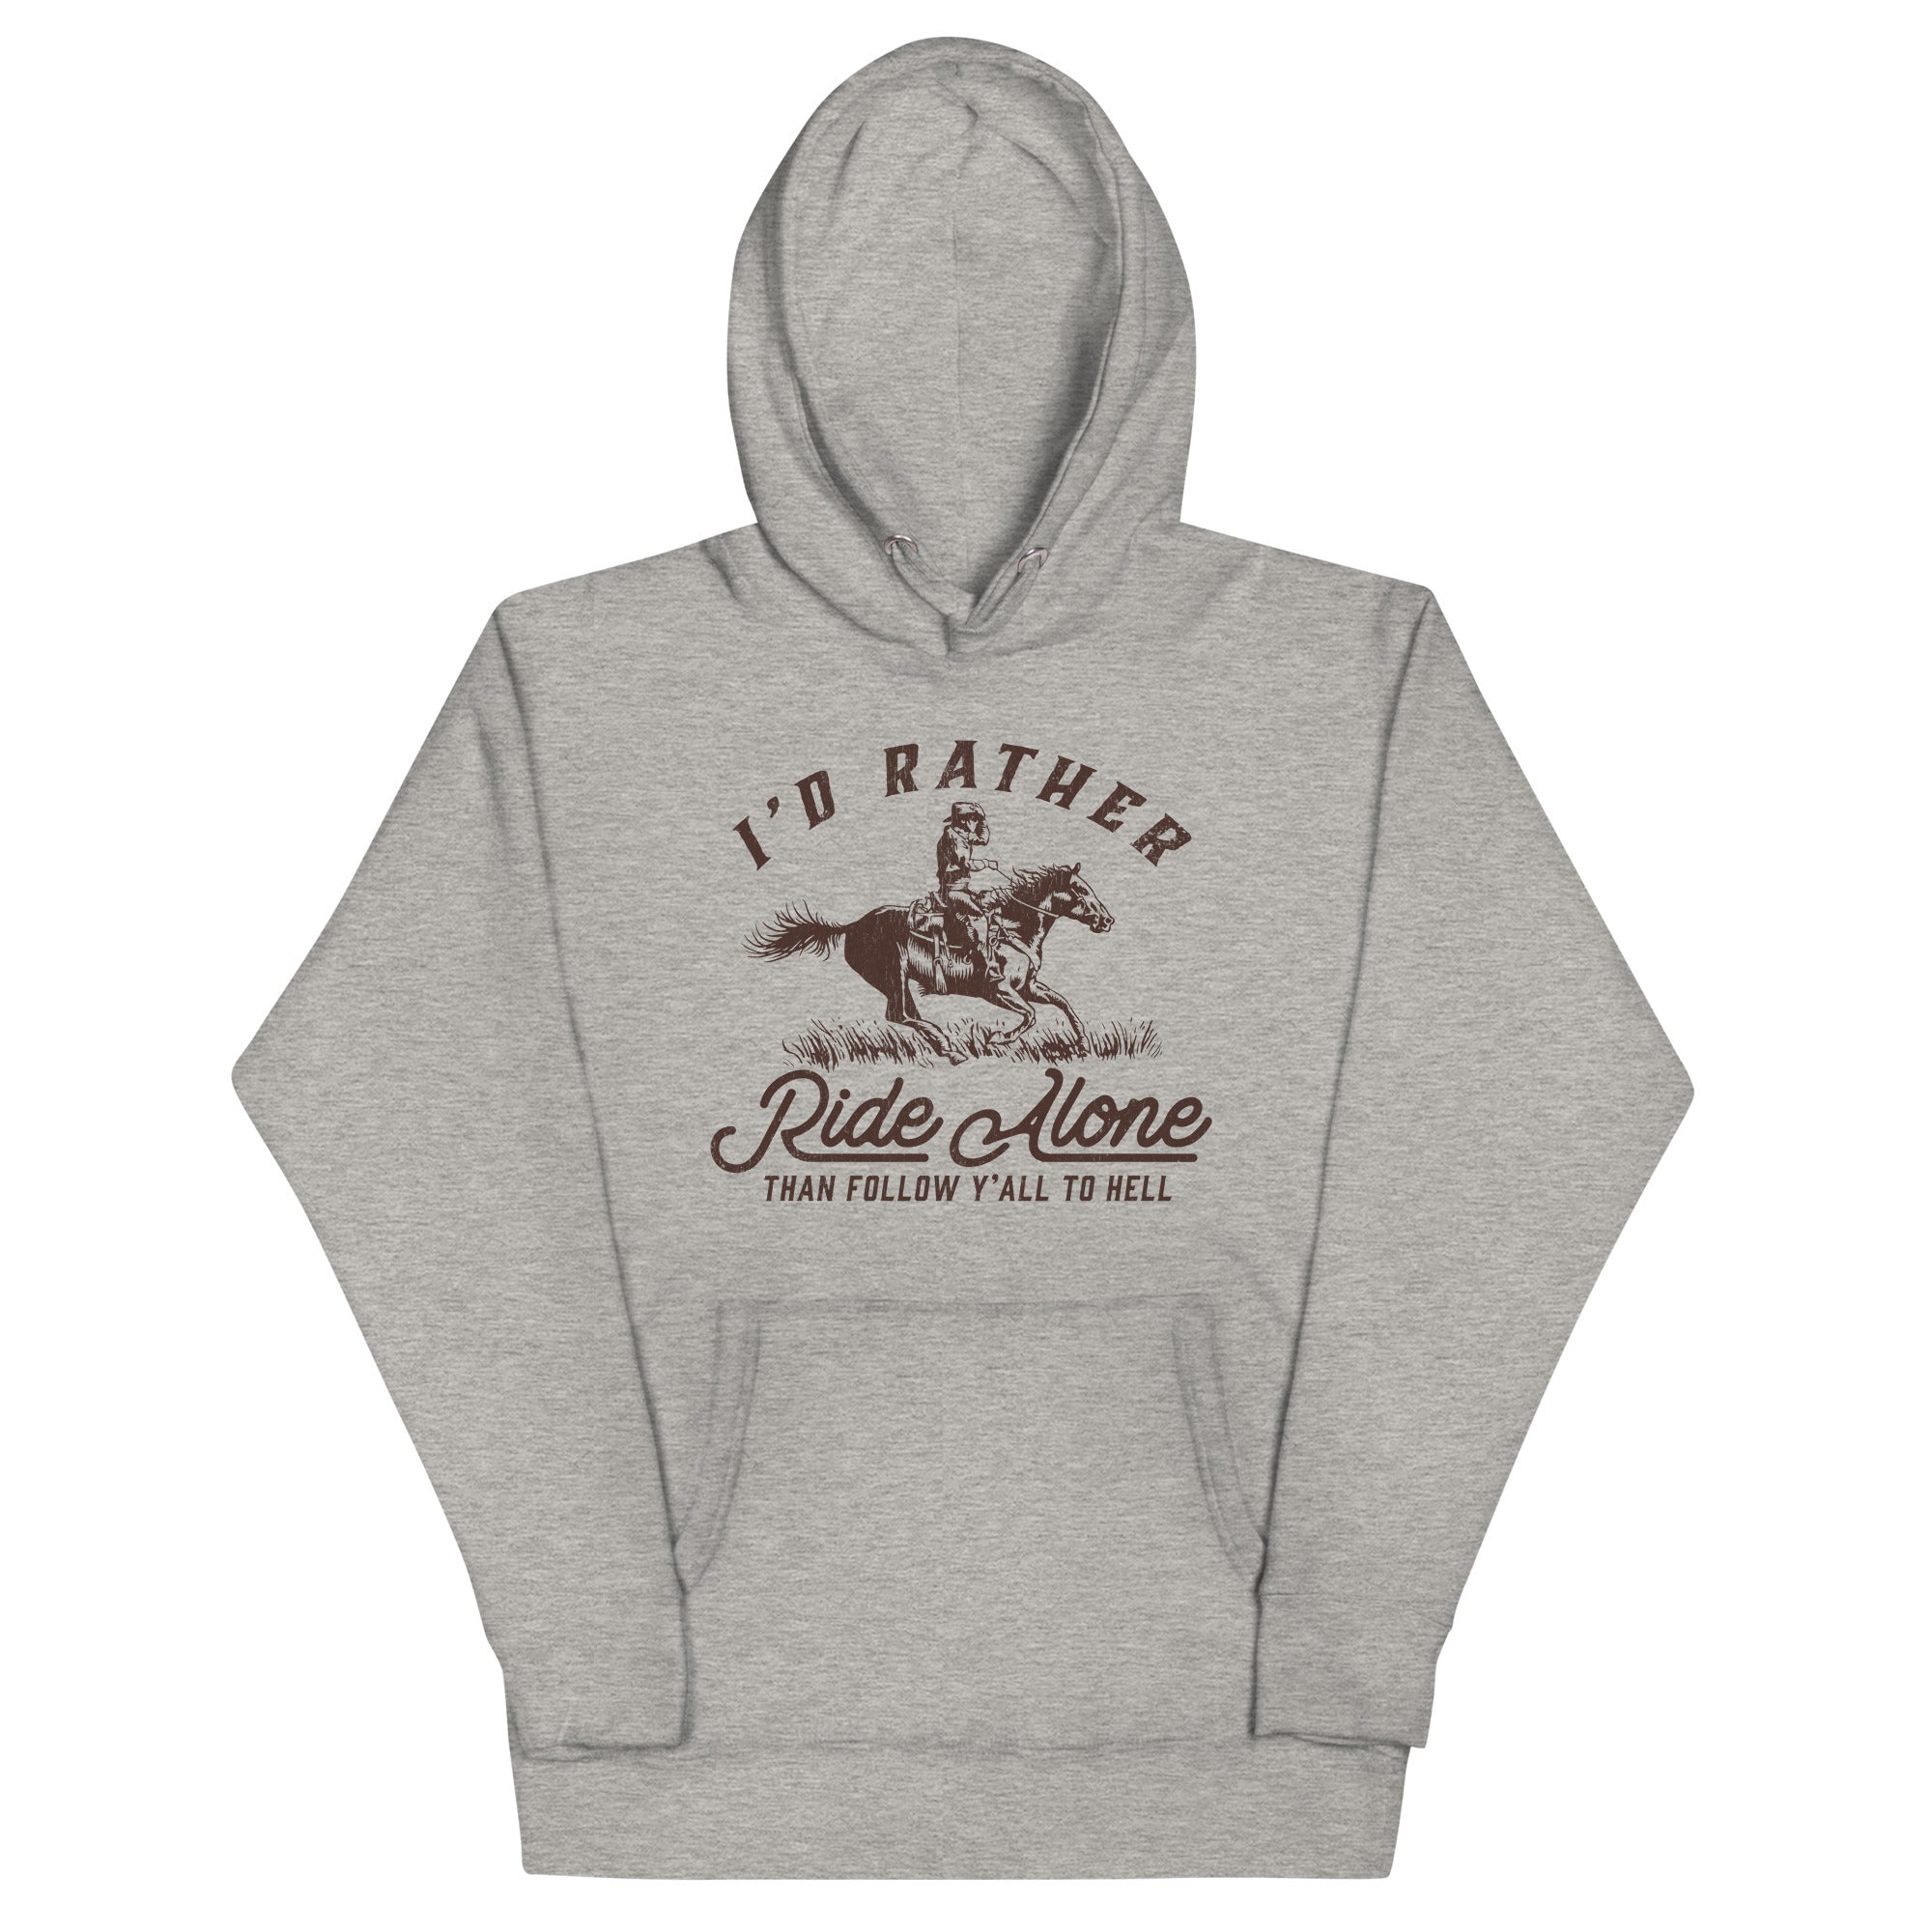 I's Rather Ride Alone Than Follow You All To Hell Unisex Hoodie